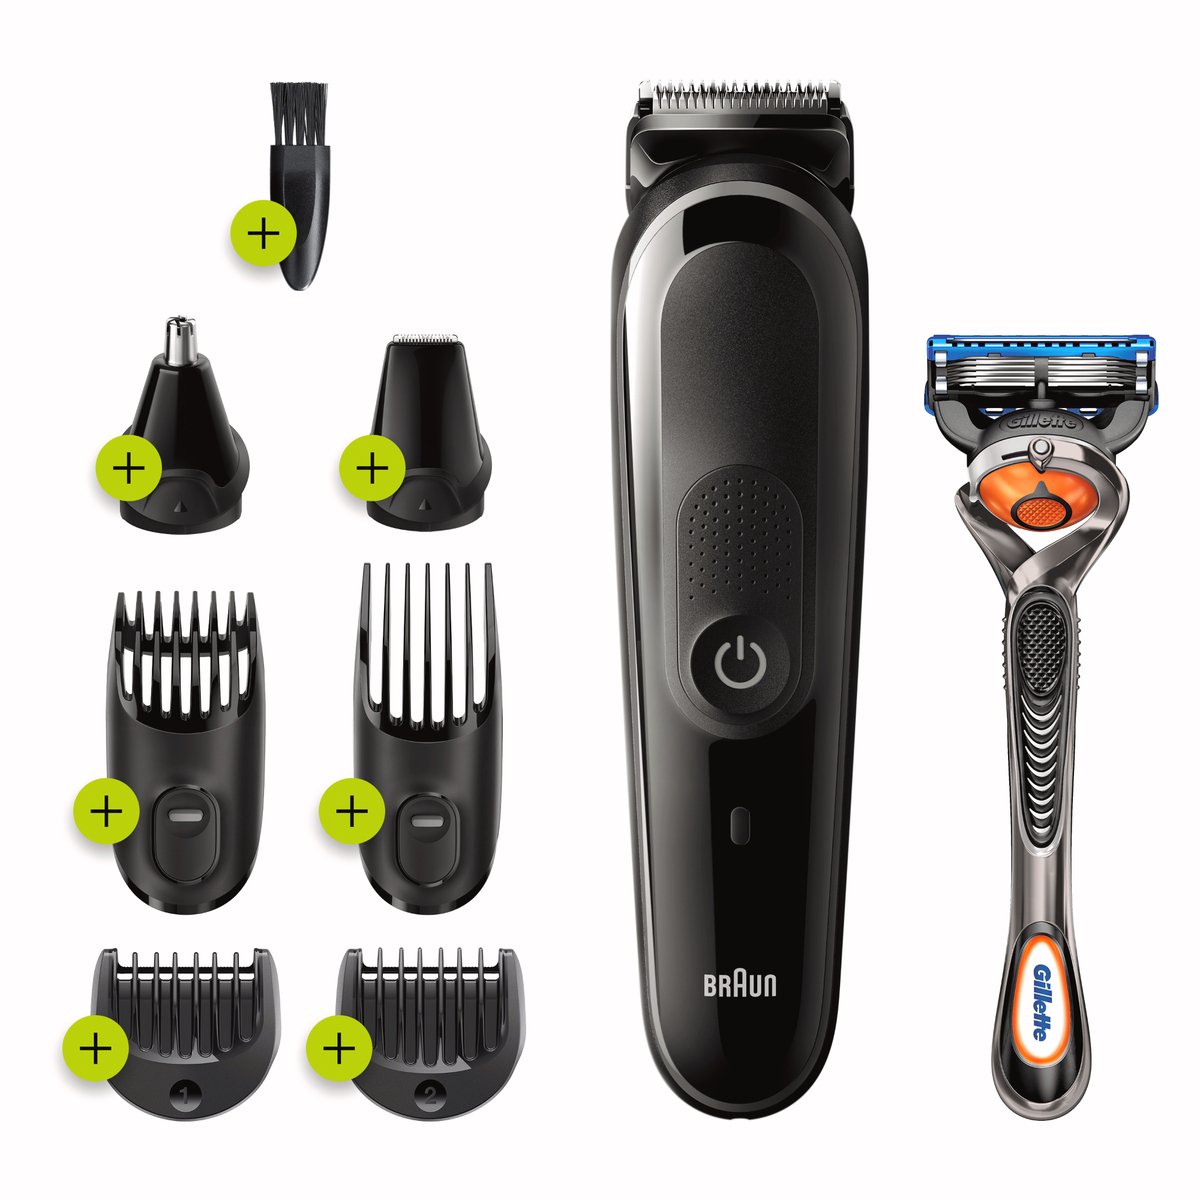 Braun 8-in-1 All-in-One Trimmer MGK 5260